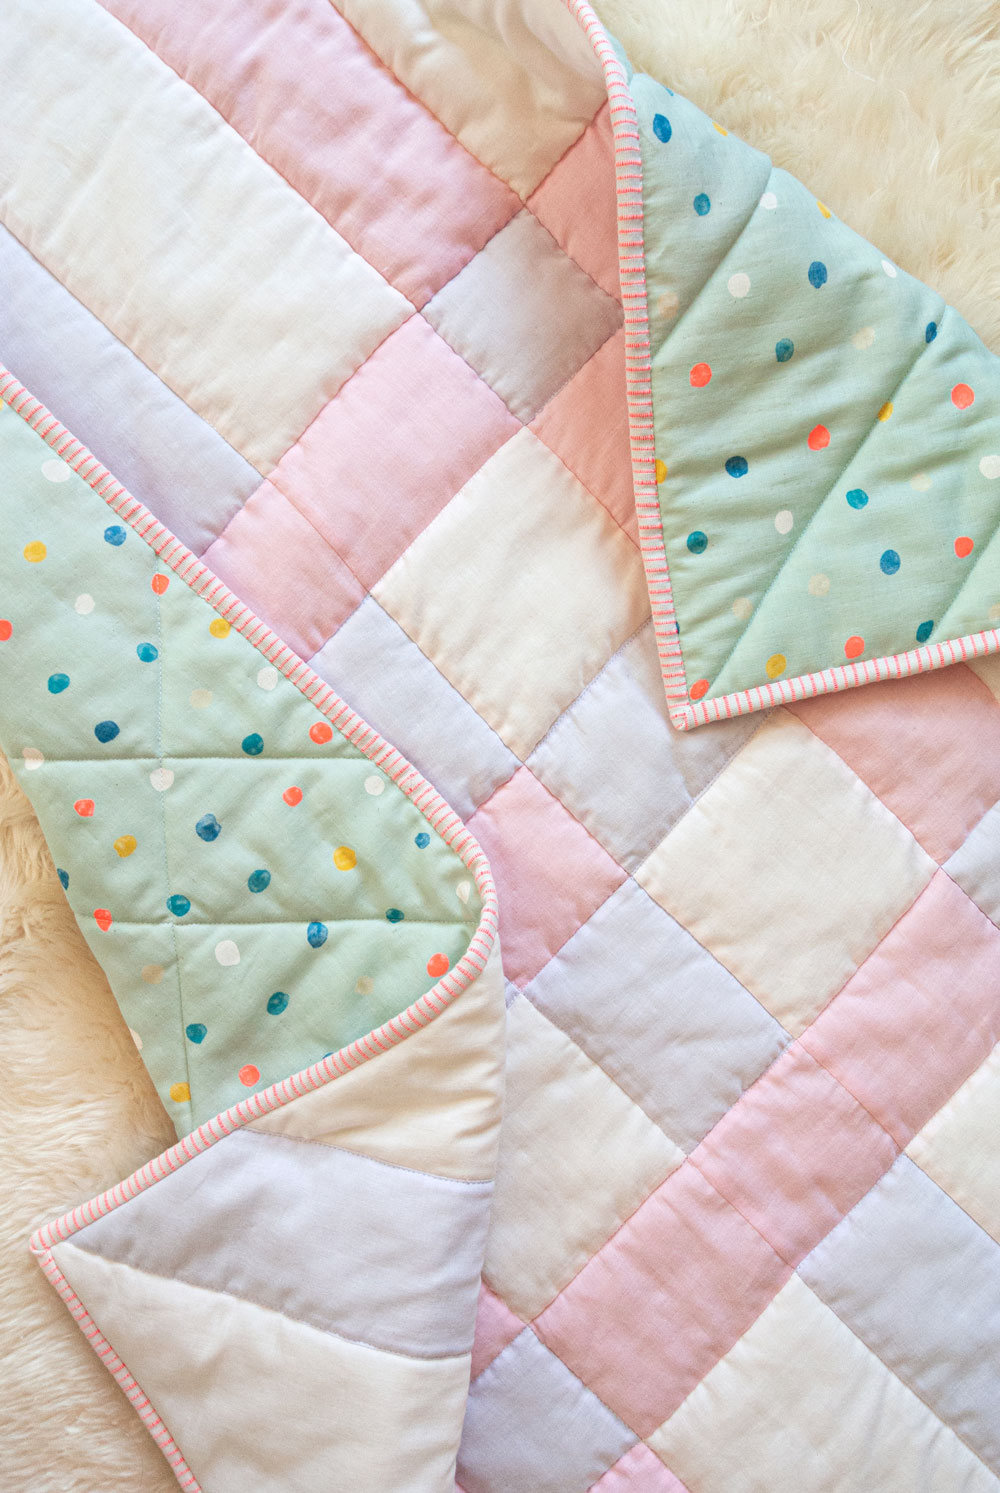 Why wool batting makes the warmest quilts! Learn how to quilt with this beautifully fluffy and sustainable fiber. suzyquilts.com #babyquilt #quilttutorial